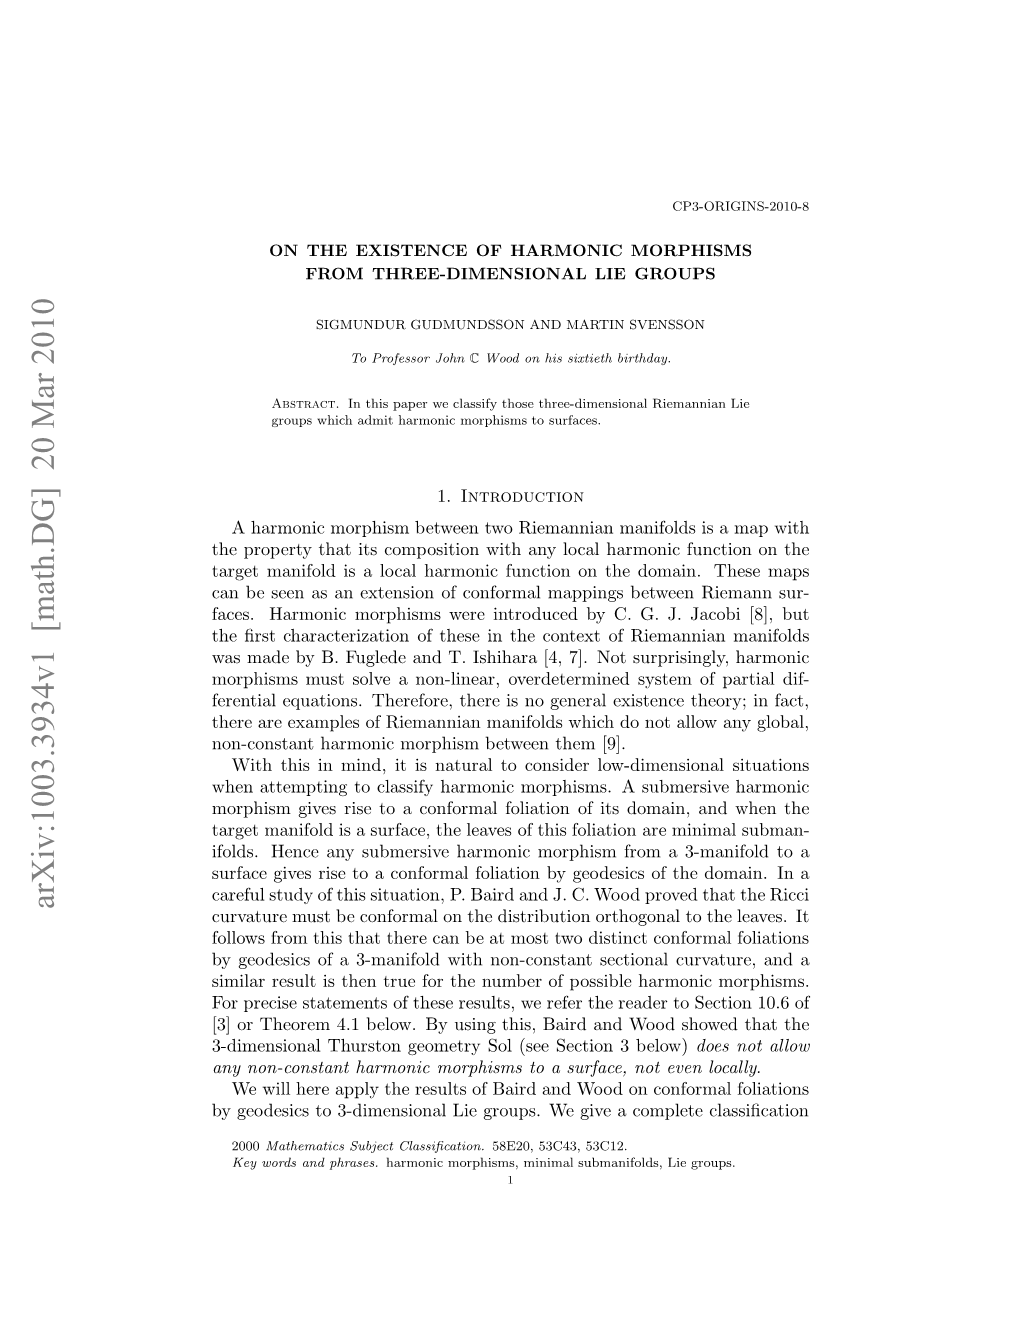 On the Existence of Harmonic Morphisms from Three-Dimensional